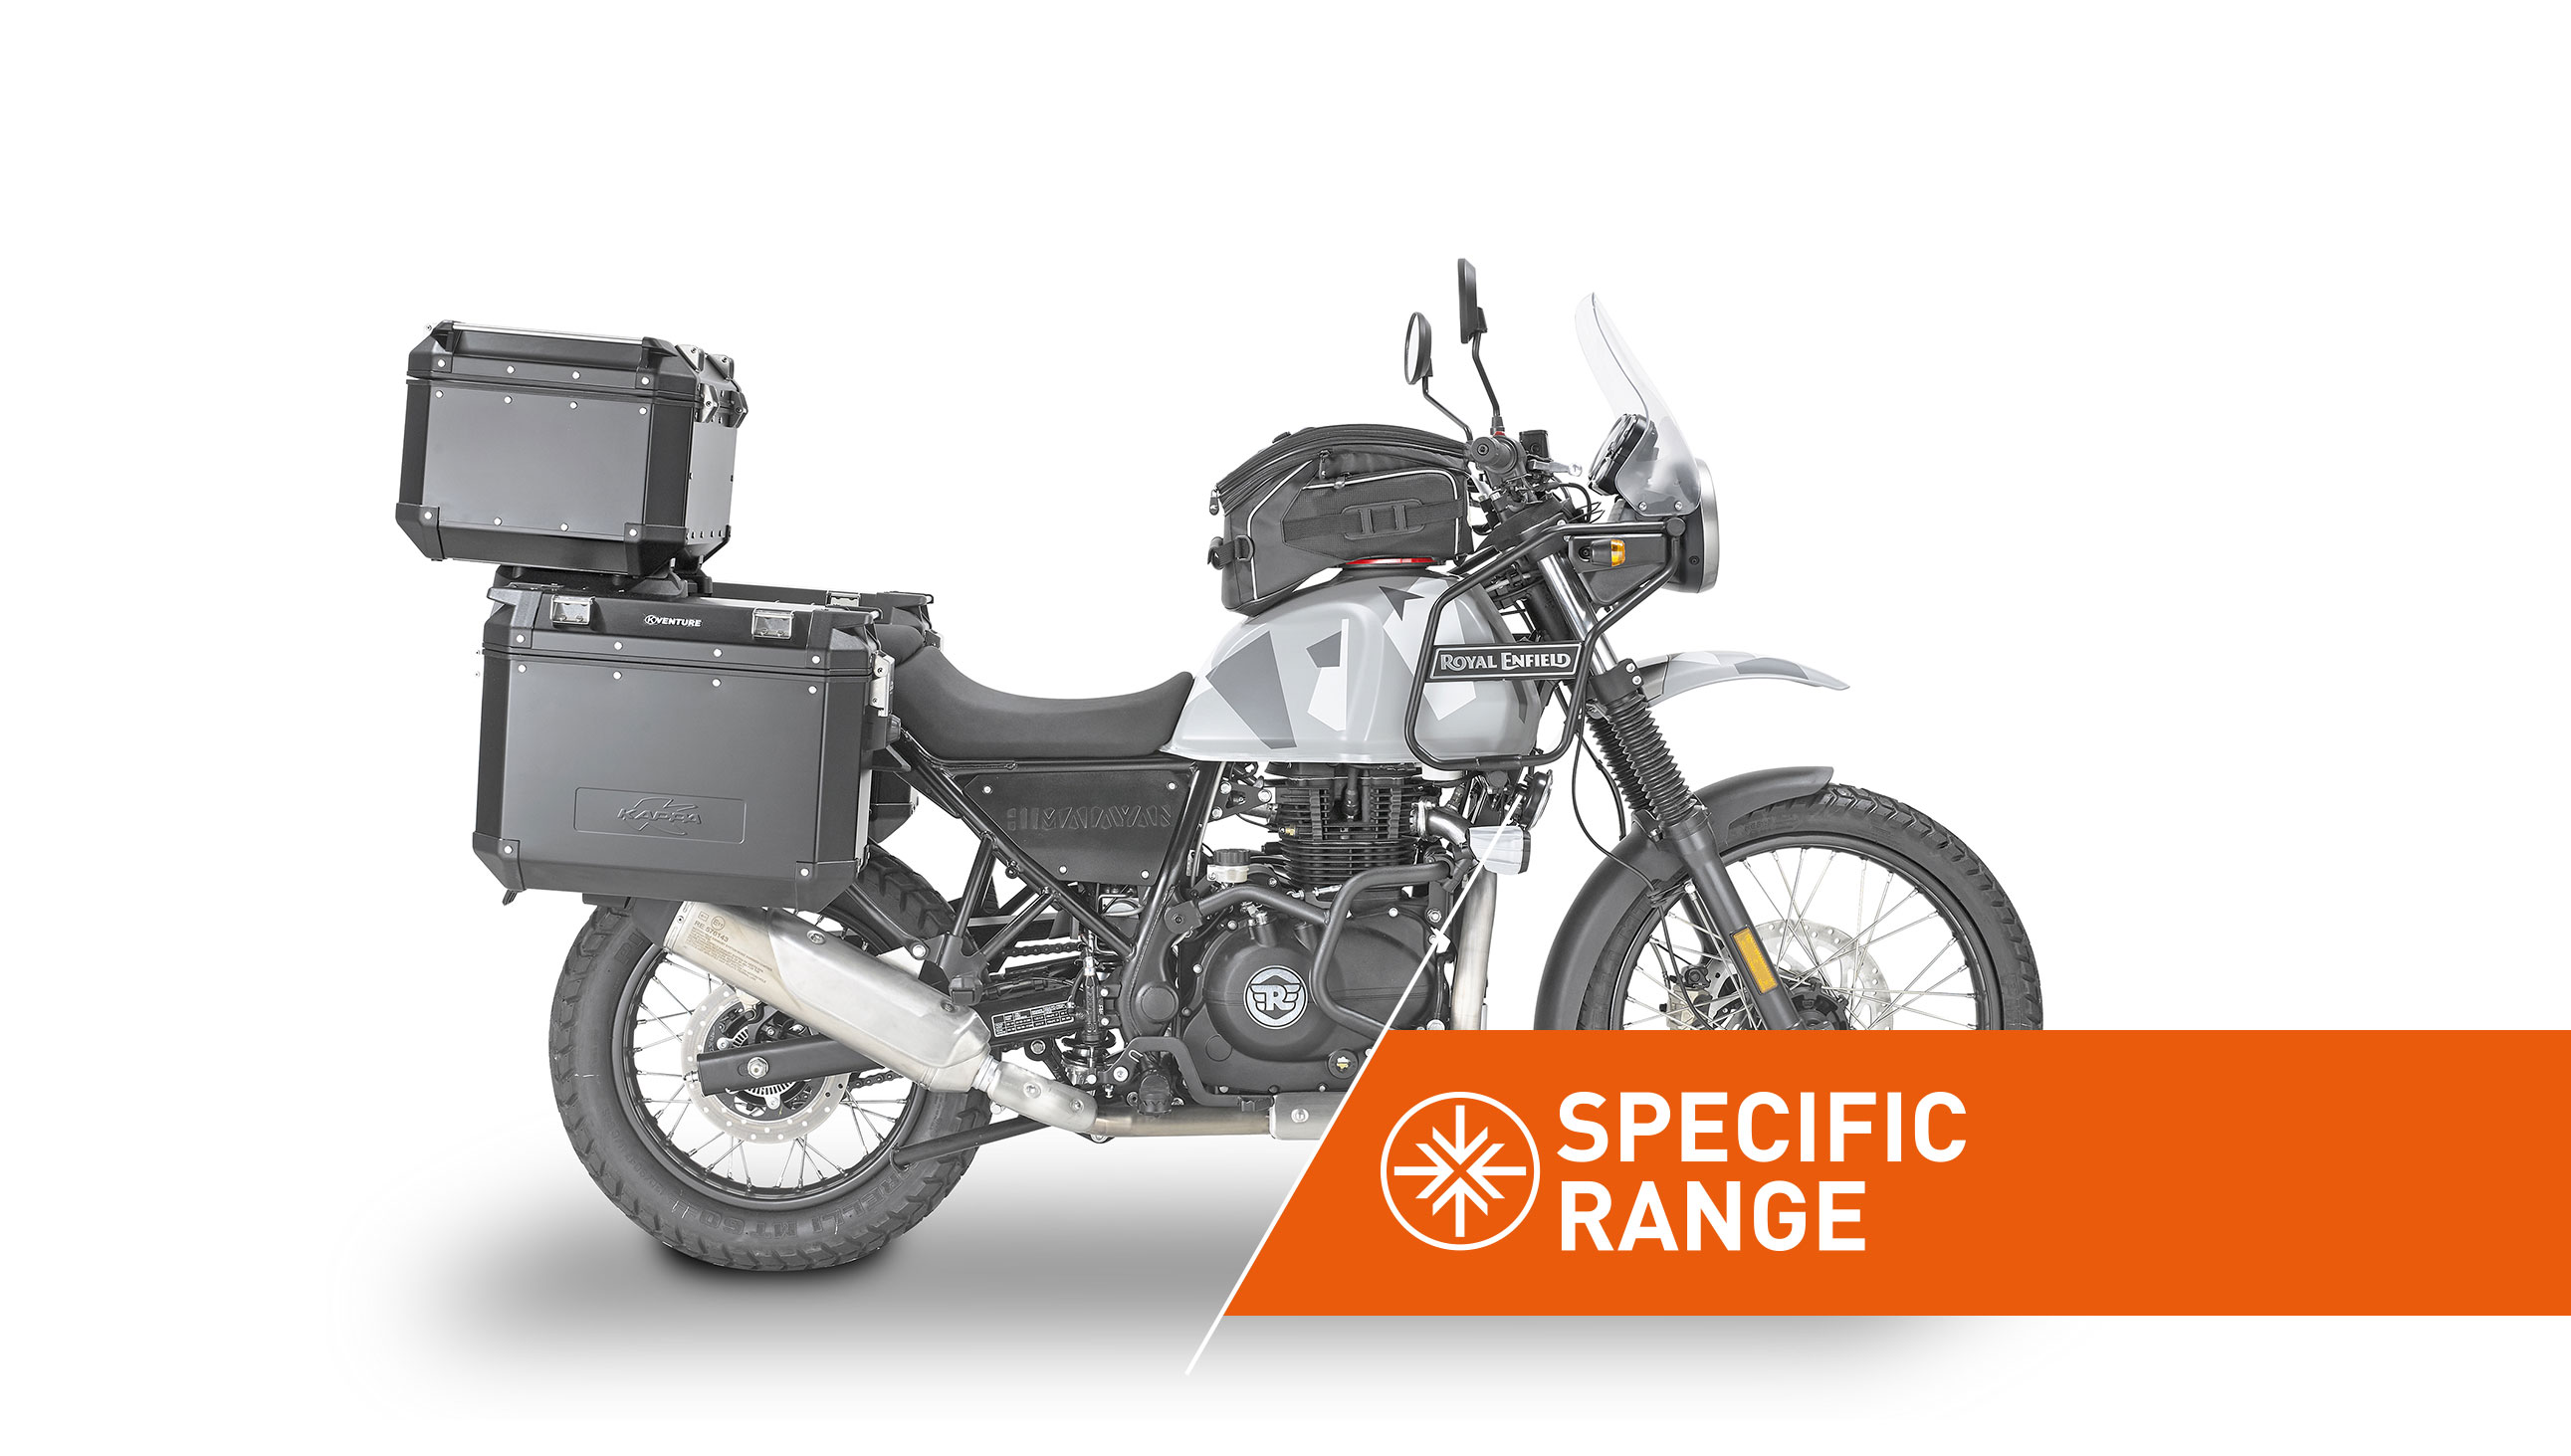 Specific range accessories for ROYALENFIELD HIMALAYAN by KAPPA MOTO.